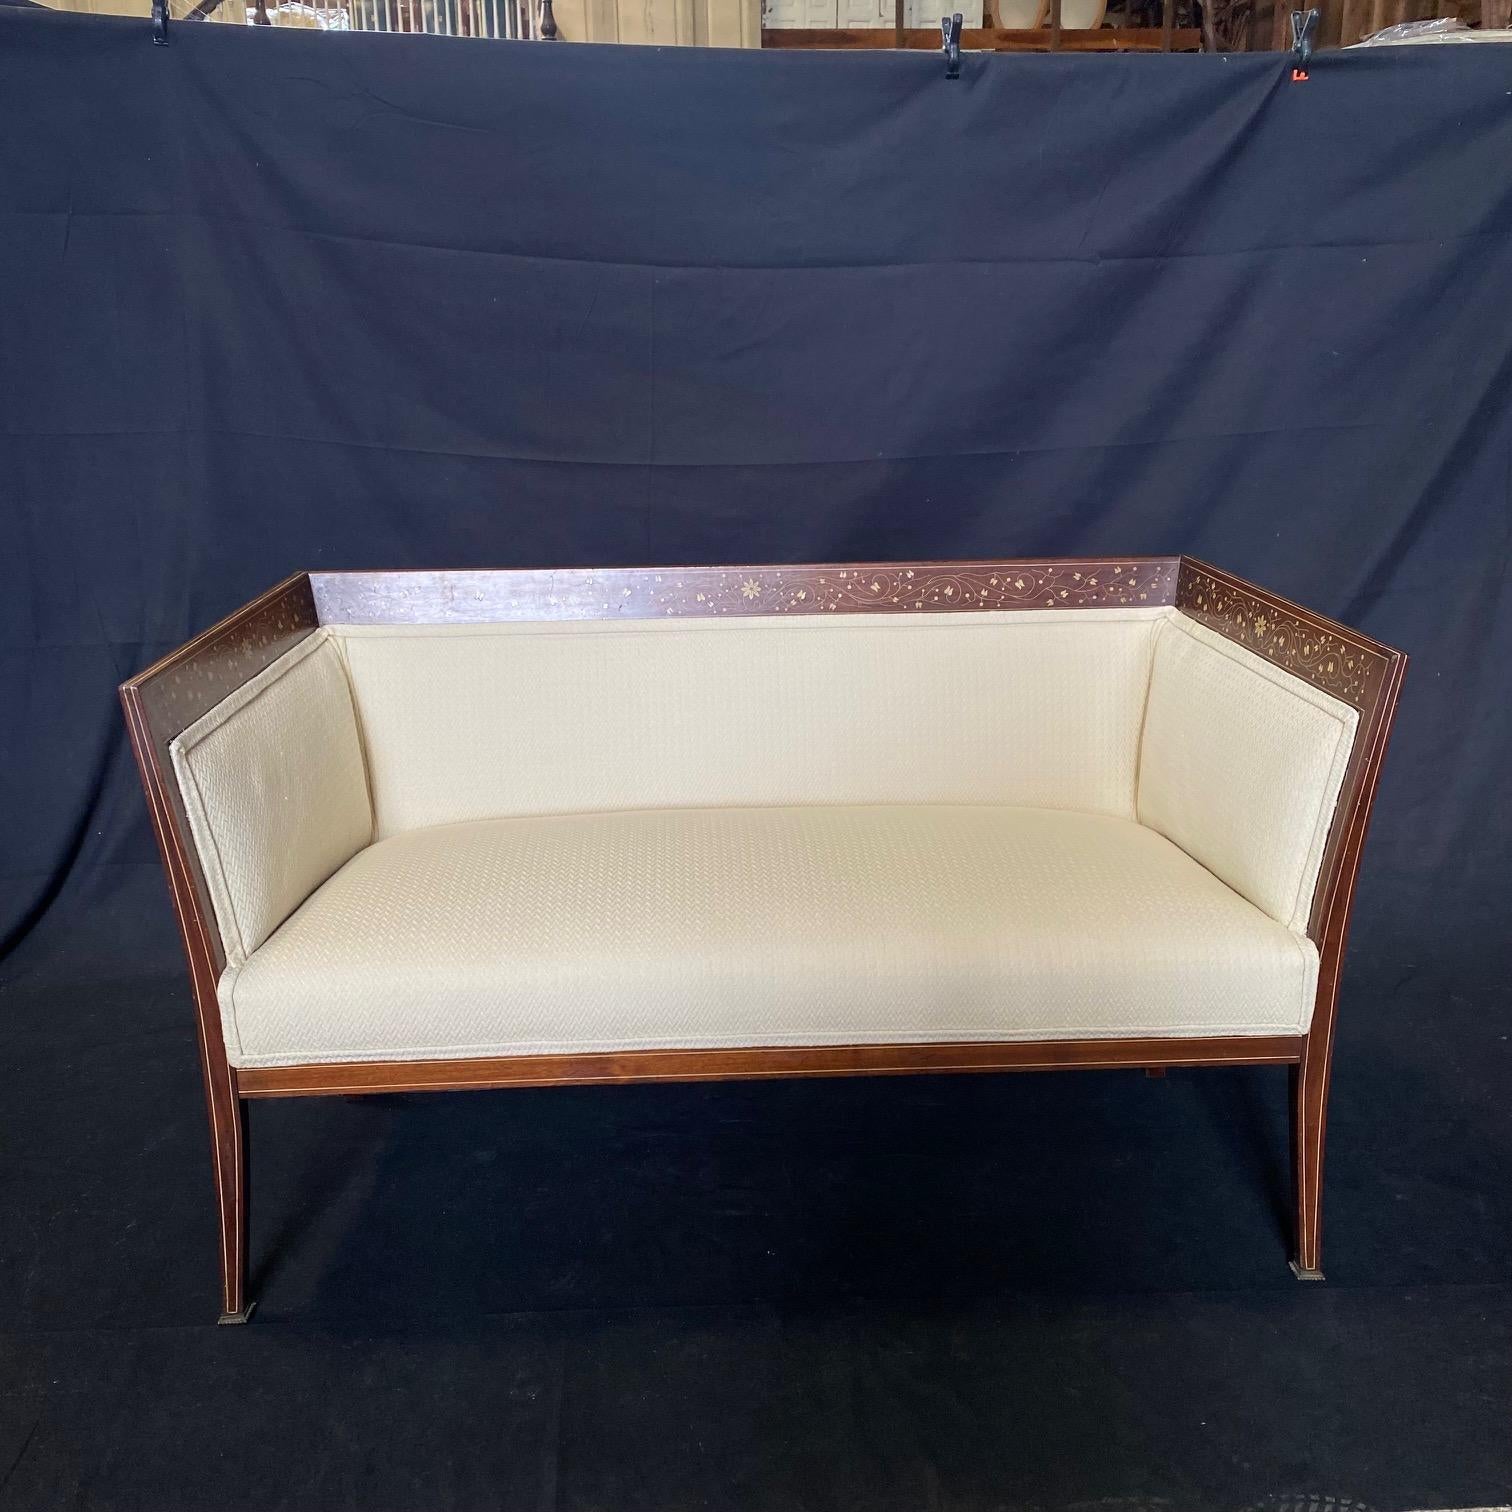 A lovely and well-proportioned inlaid sofa or loveseat with straight back and sides,  graceful lined tapered legs in mahogany embellished with inlays of berries, delicate flowers and foliage. Newly upholstered!  Beautiful from every angle.
#5966

H